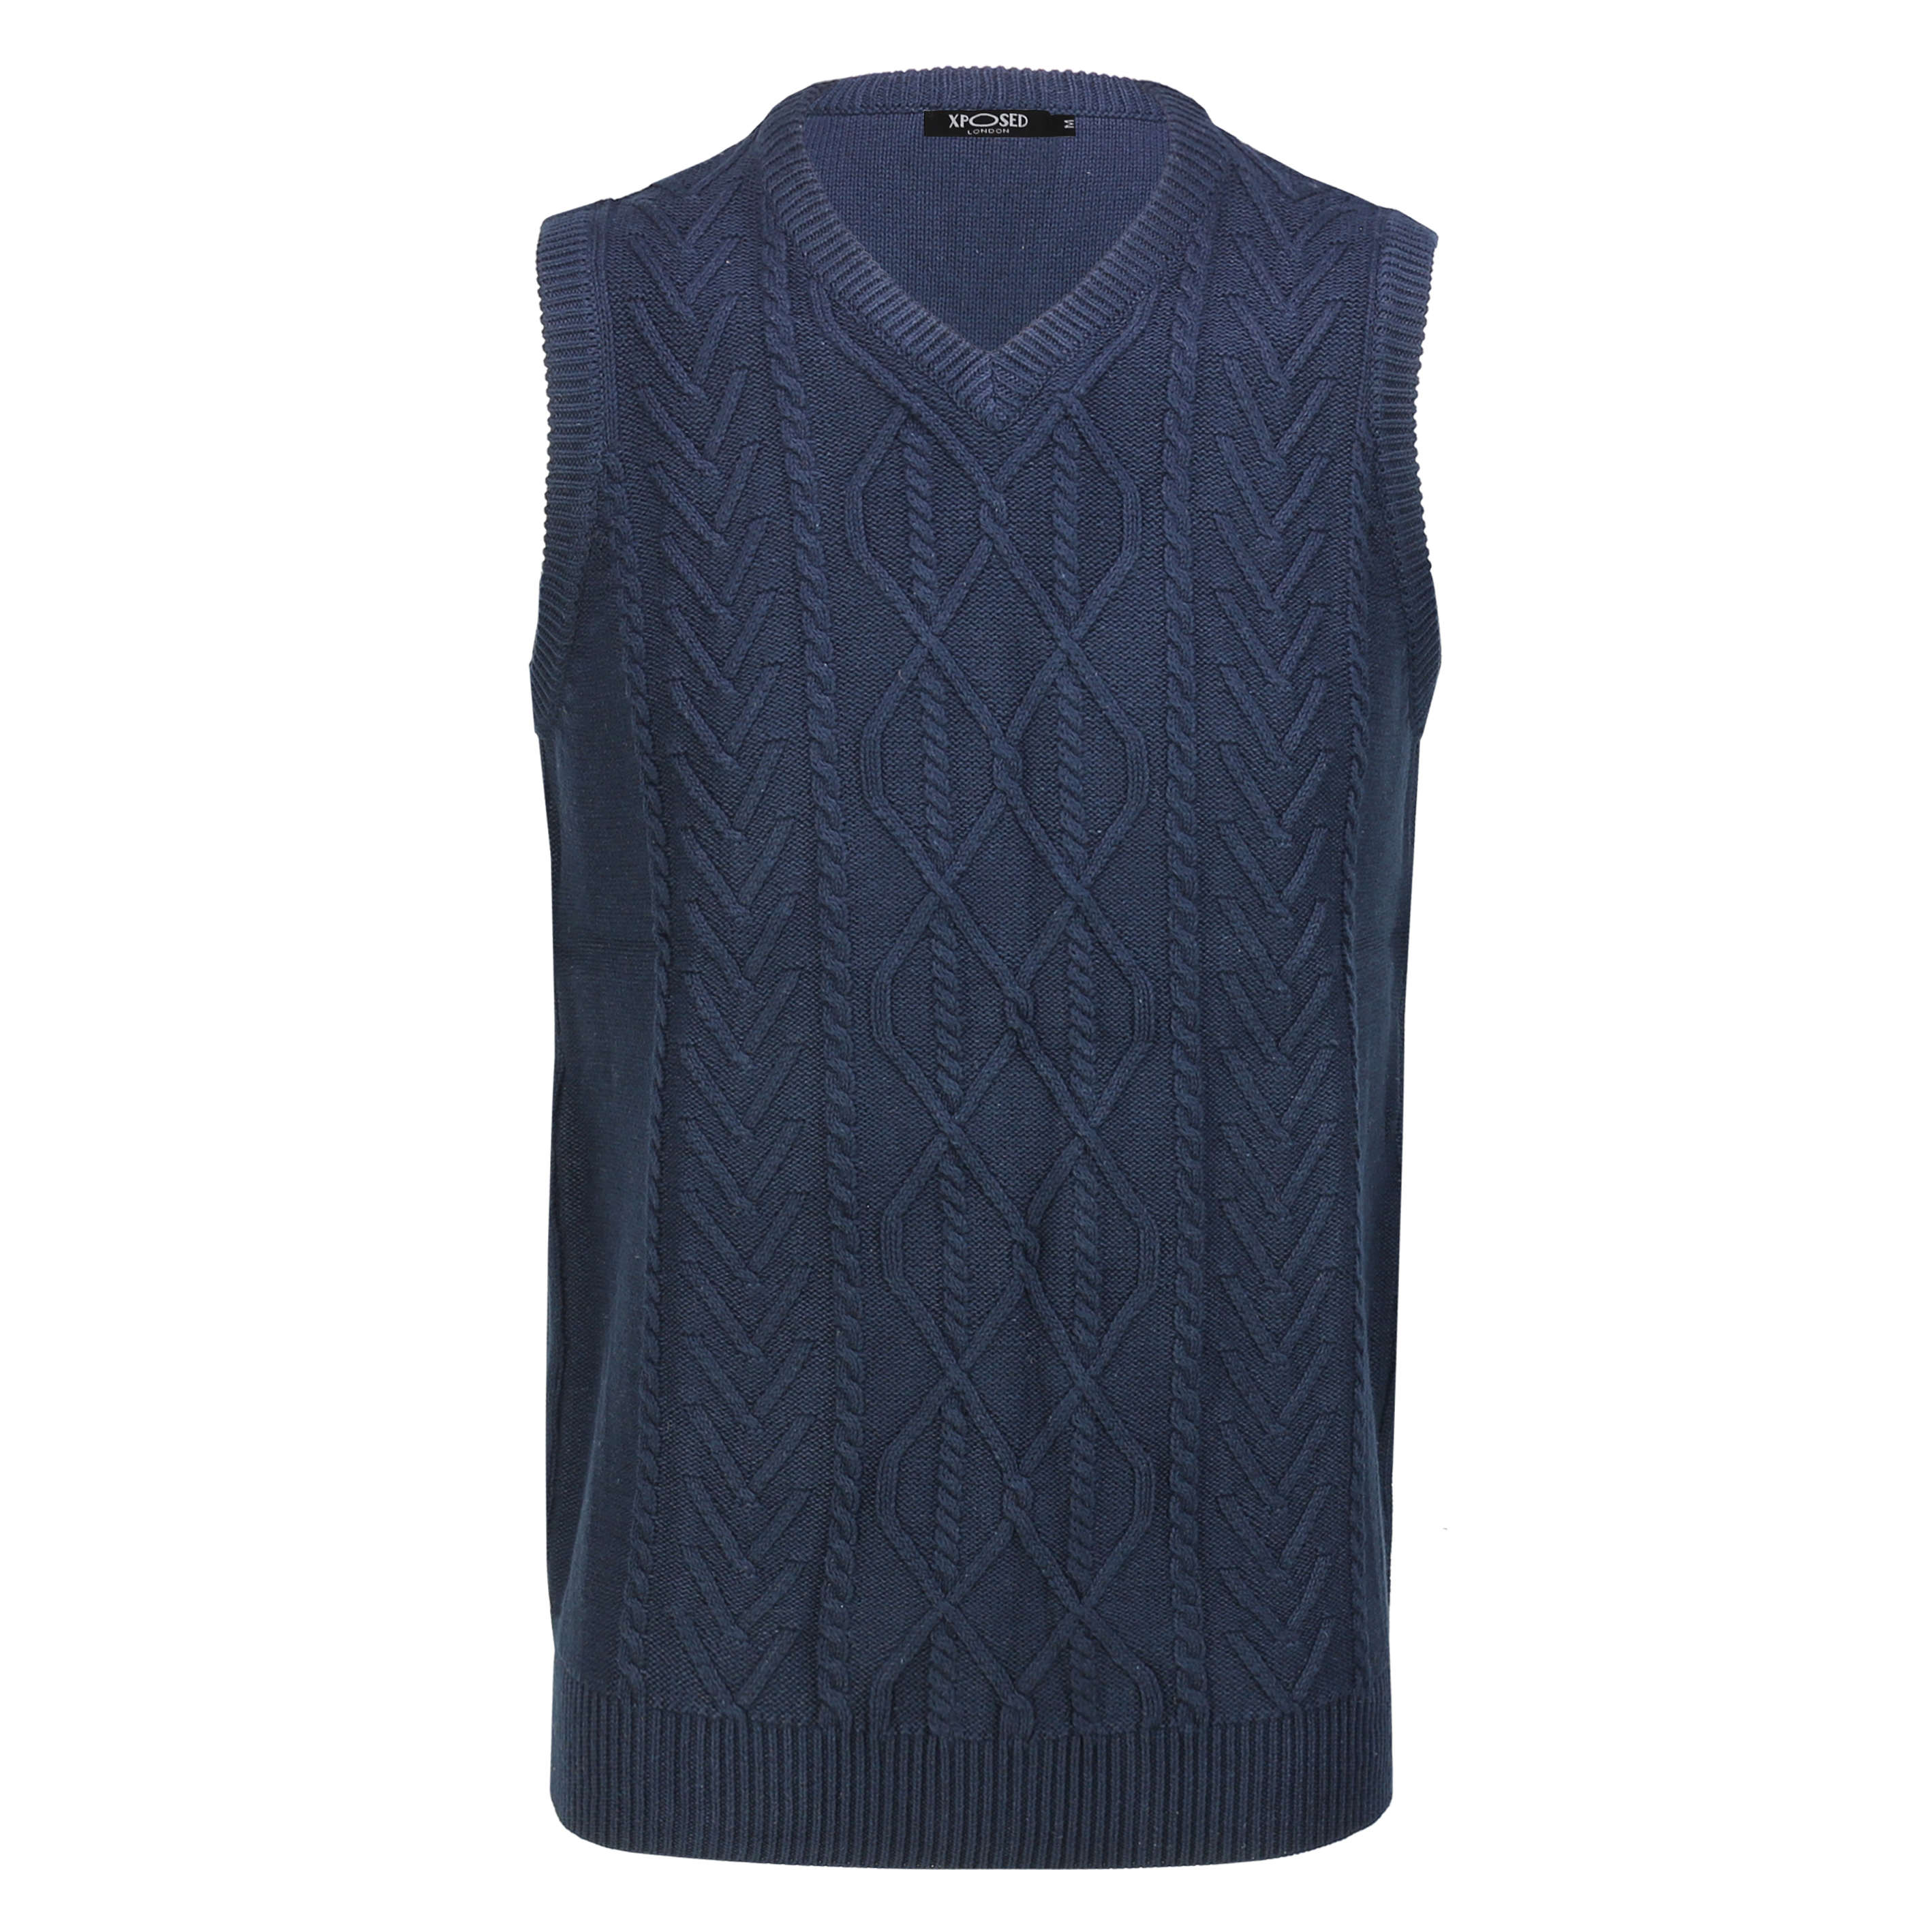 Classic Sleeveless V Neck Navy Jumper Cable Knitted